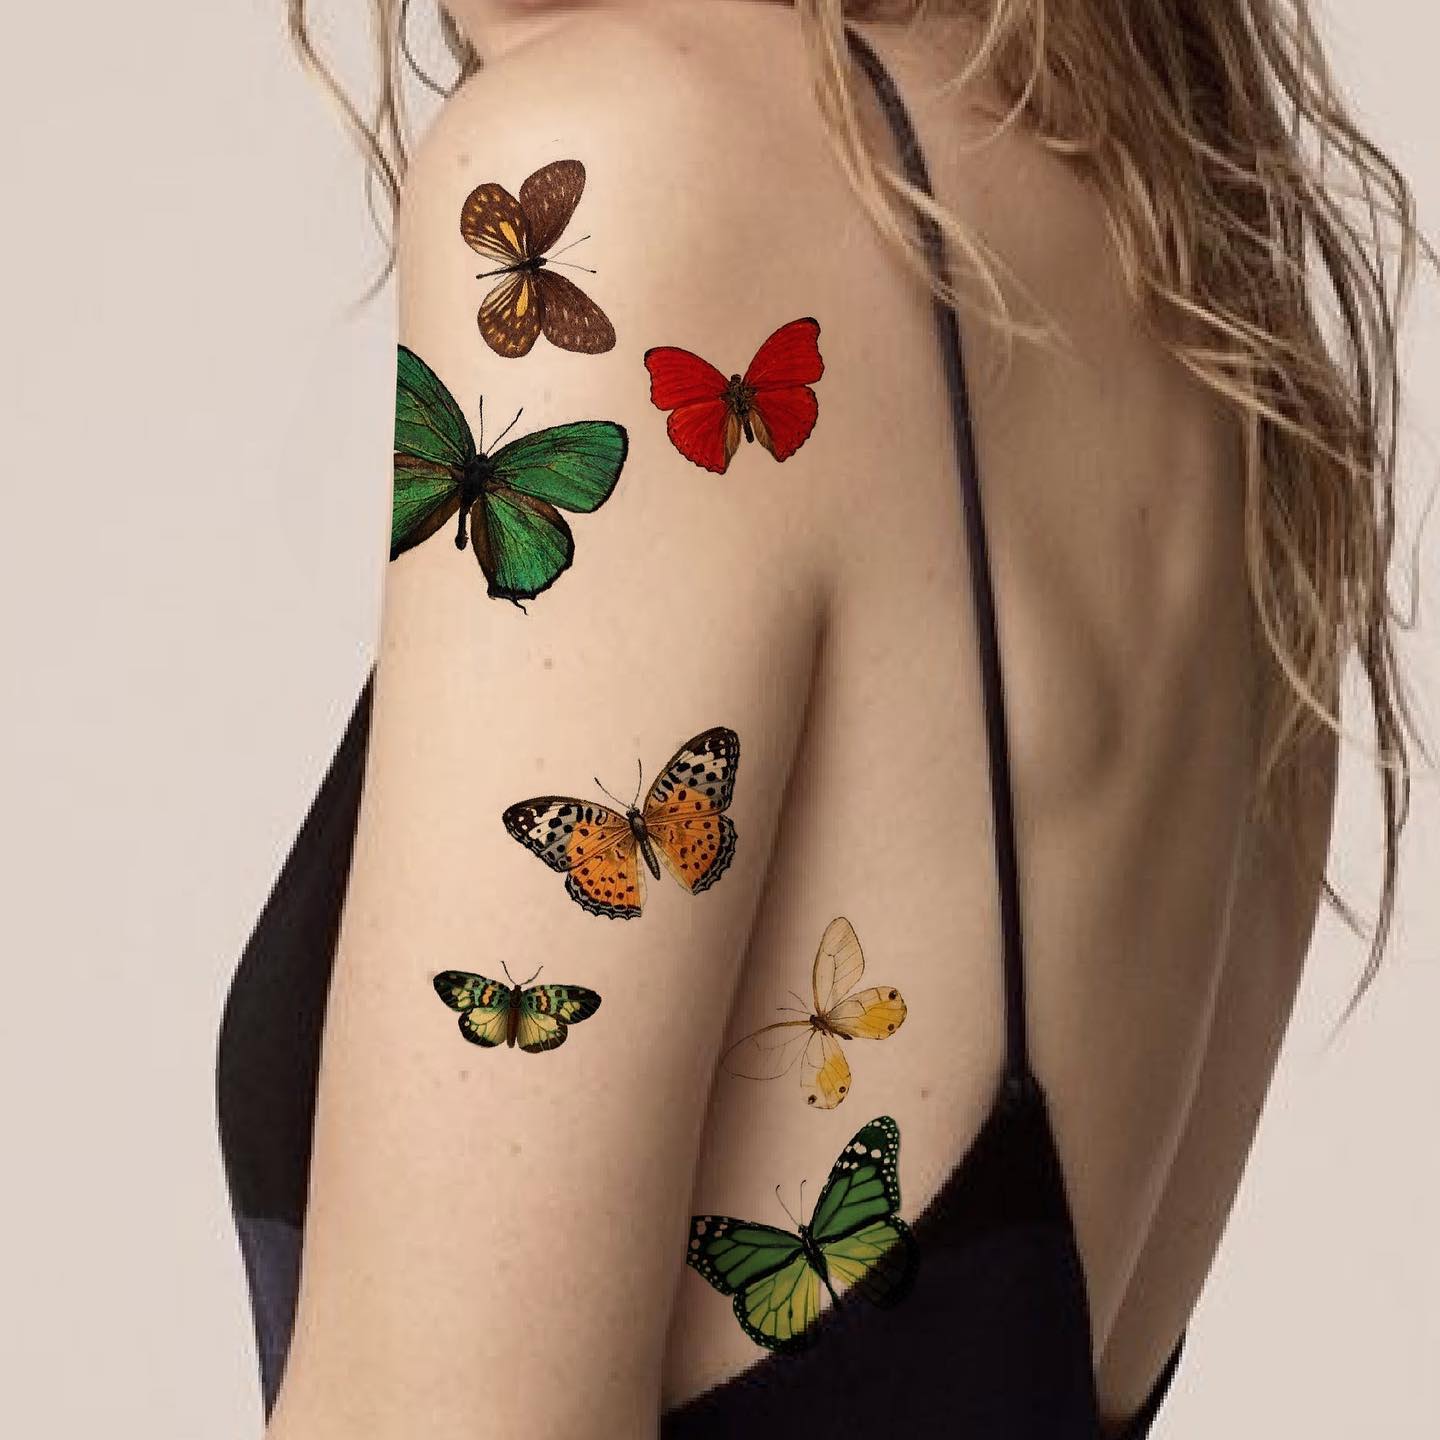 Colorful Butterfly Tattoos on Arm and Side